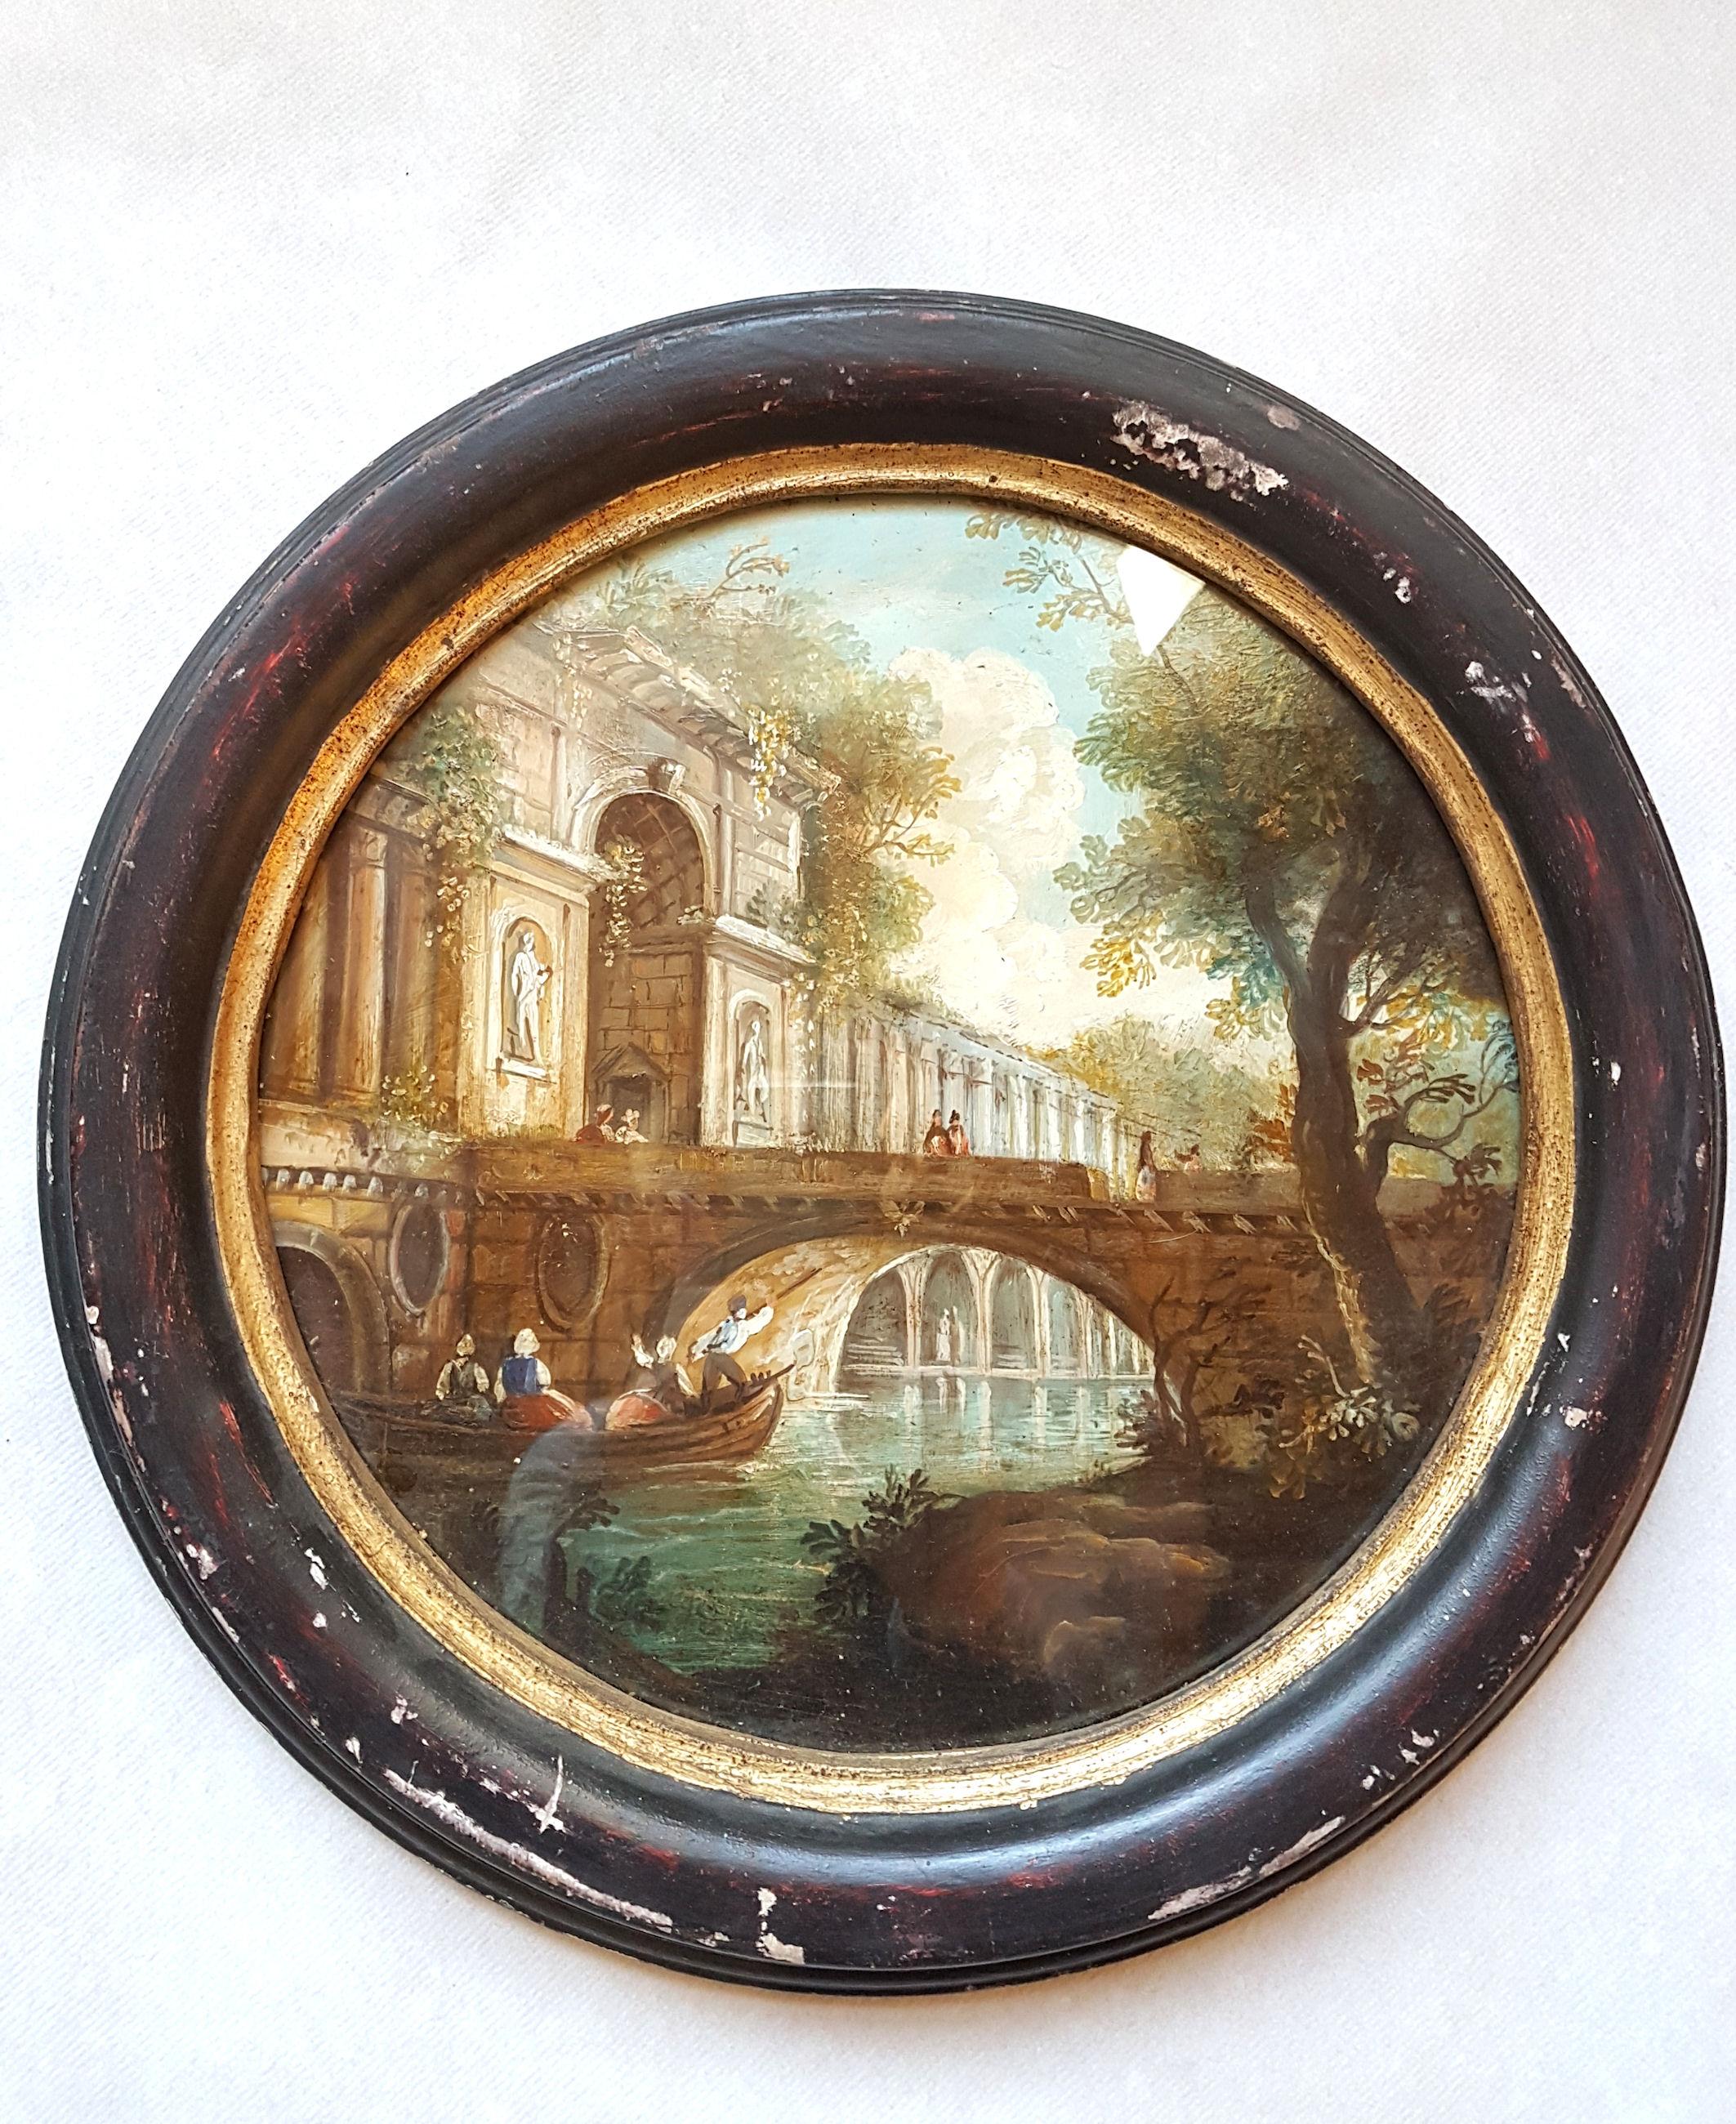 Neoclassical Revival Pair of Italian Round Oil Paintings on Brass with 18th Century Decor circa 1960s